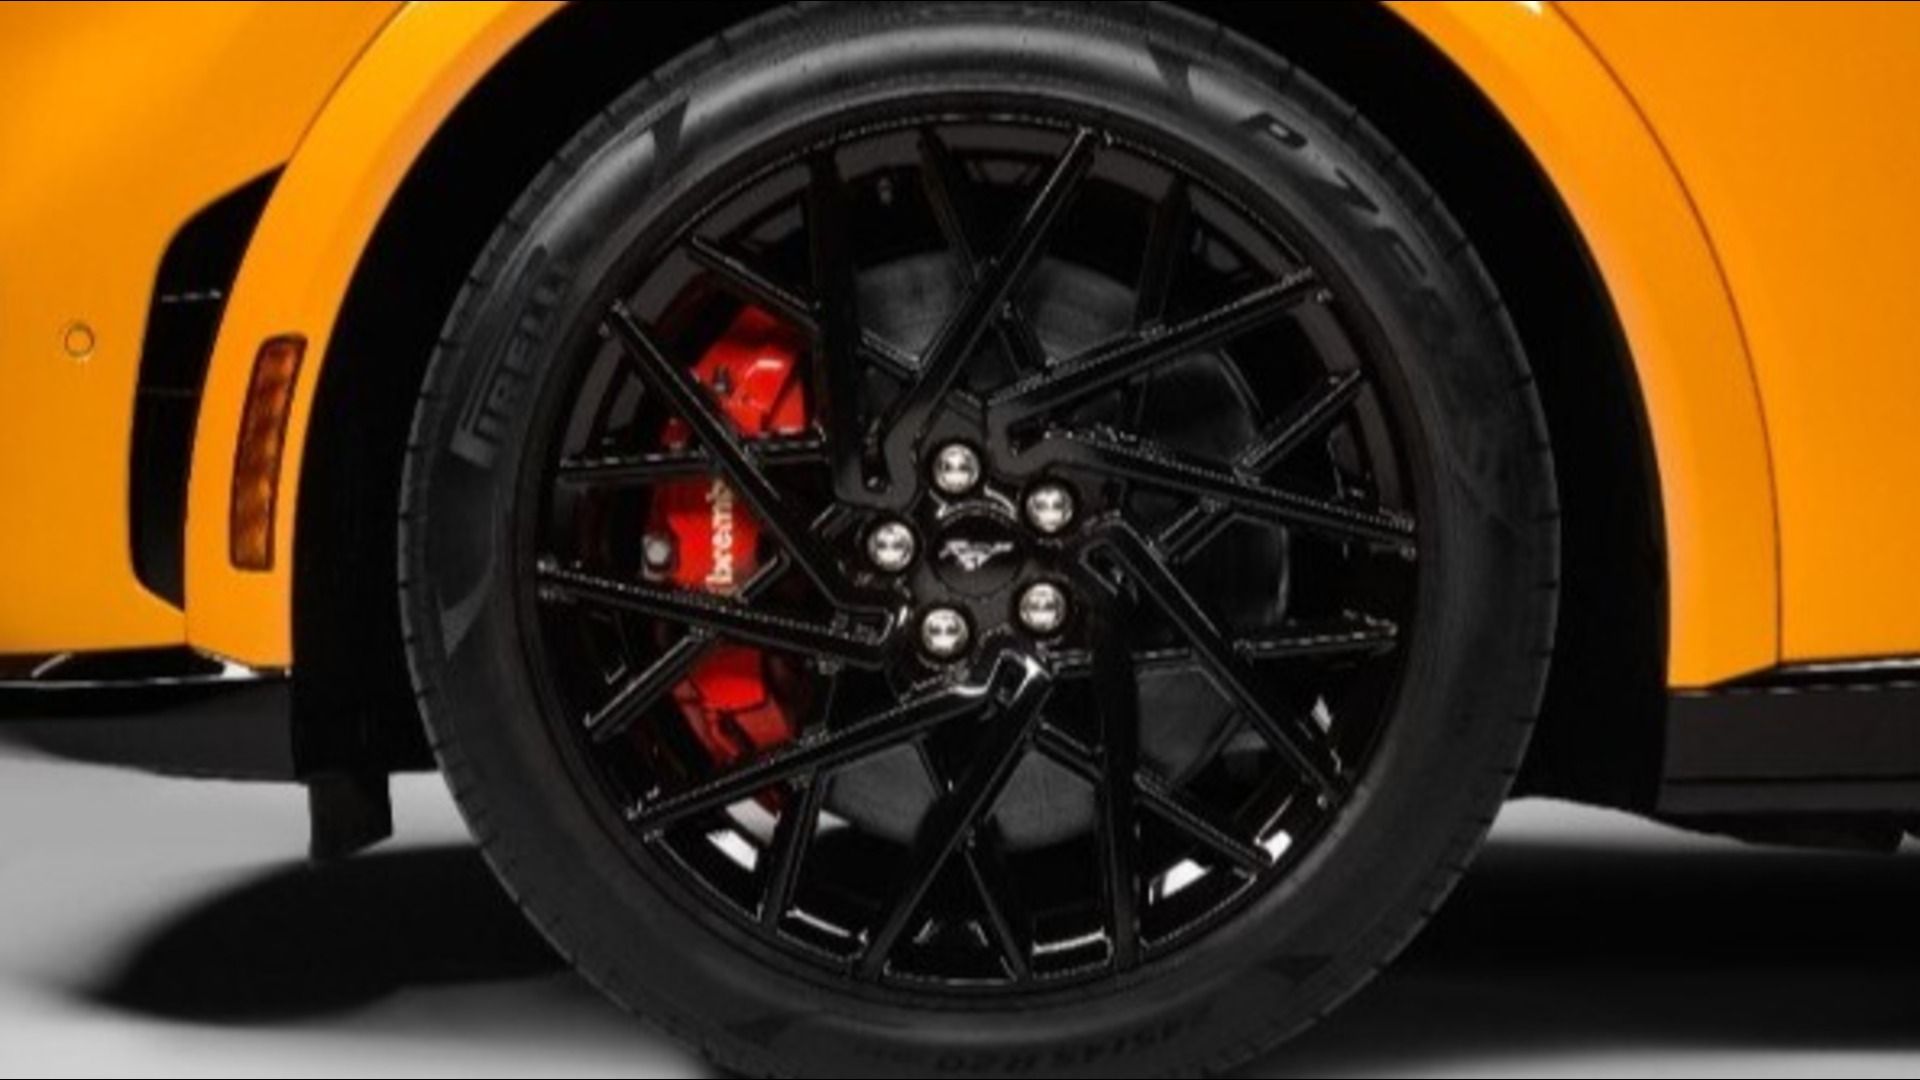 These wheels strike a balance between elegance and sportiness.